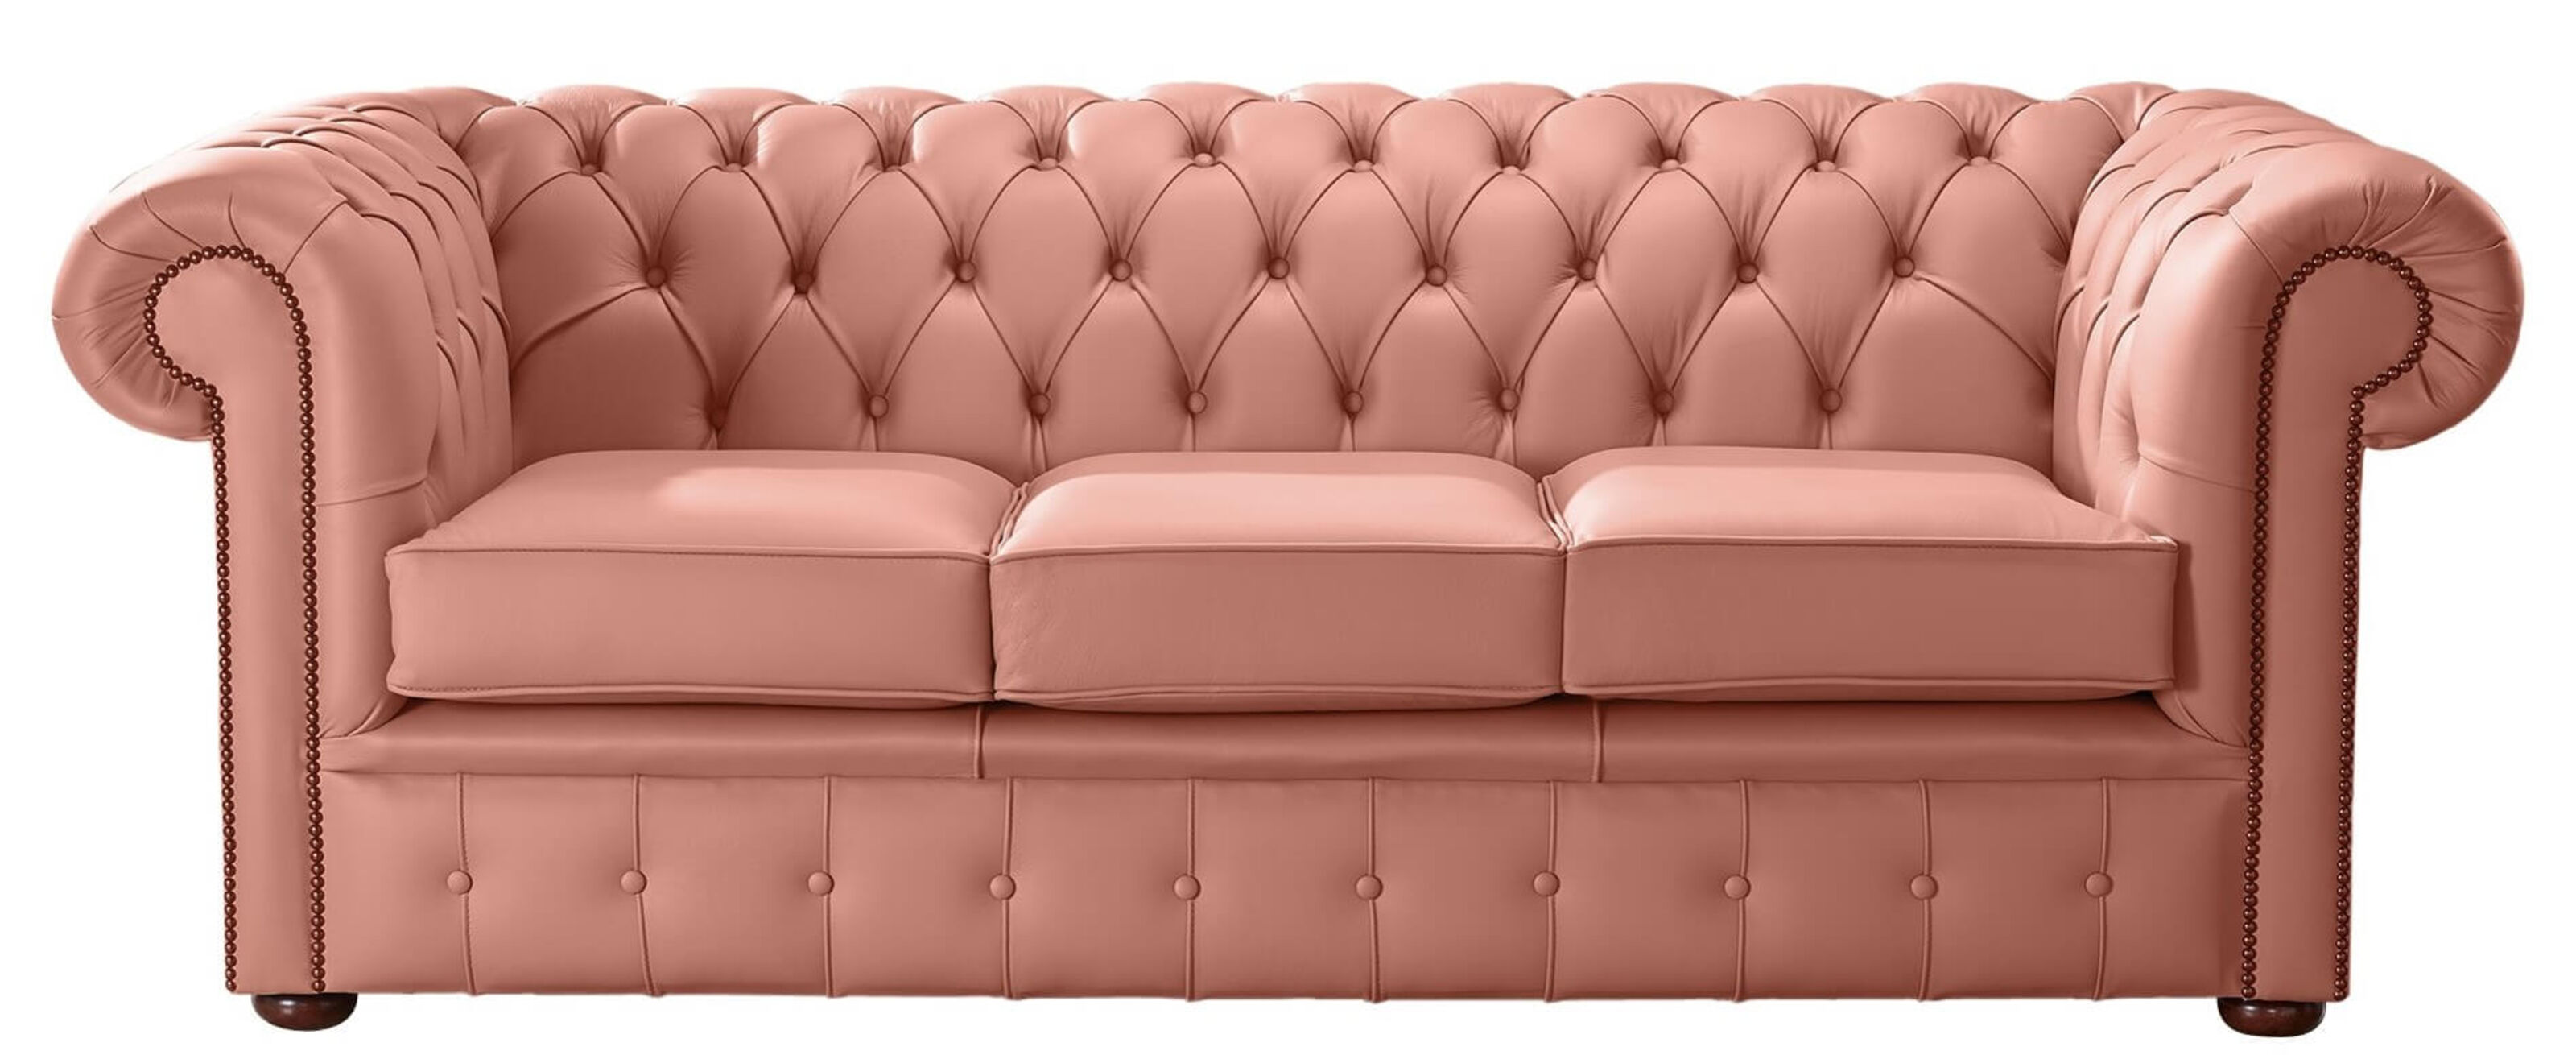 Simplify Your Life with a Chesterfield Sofa Bed  %Post Title